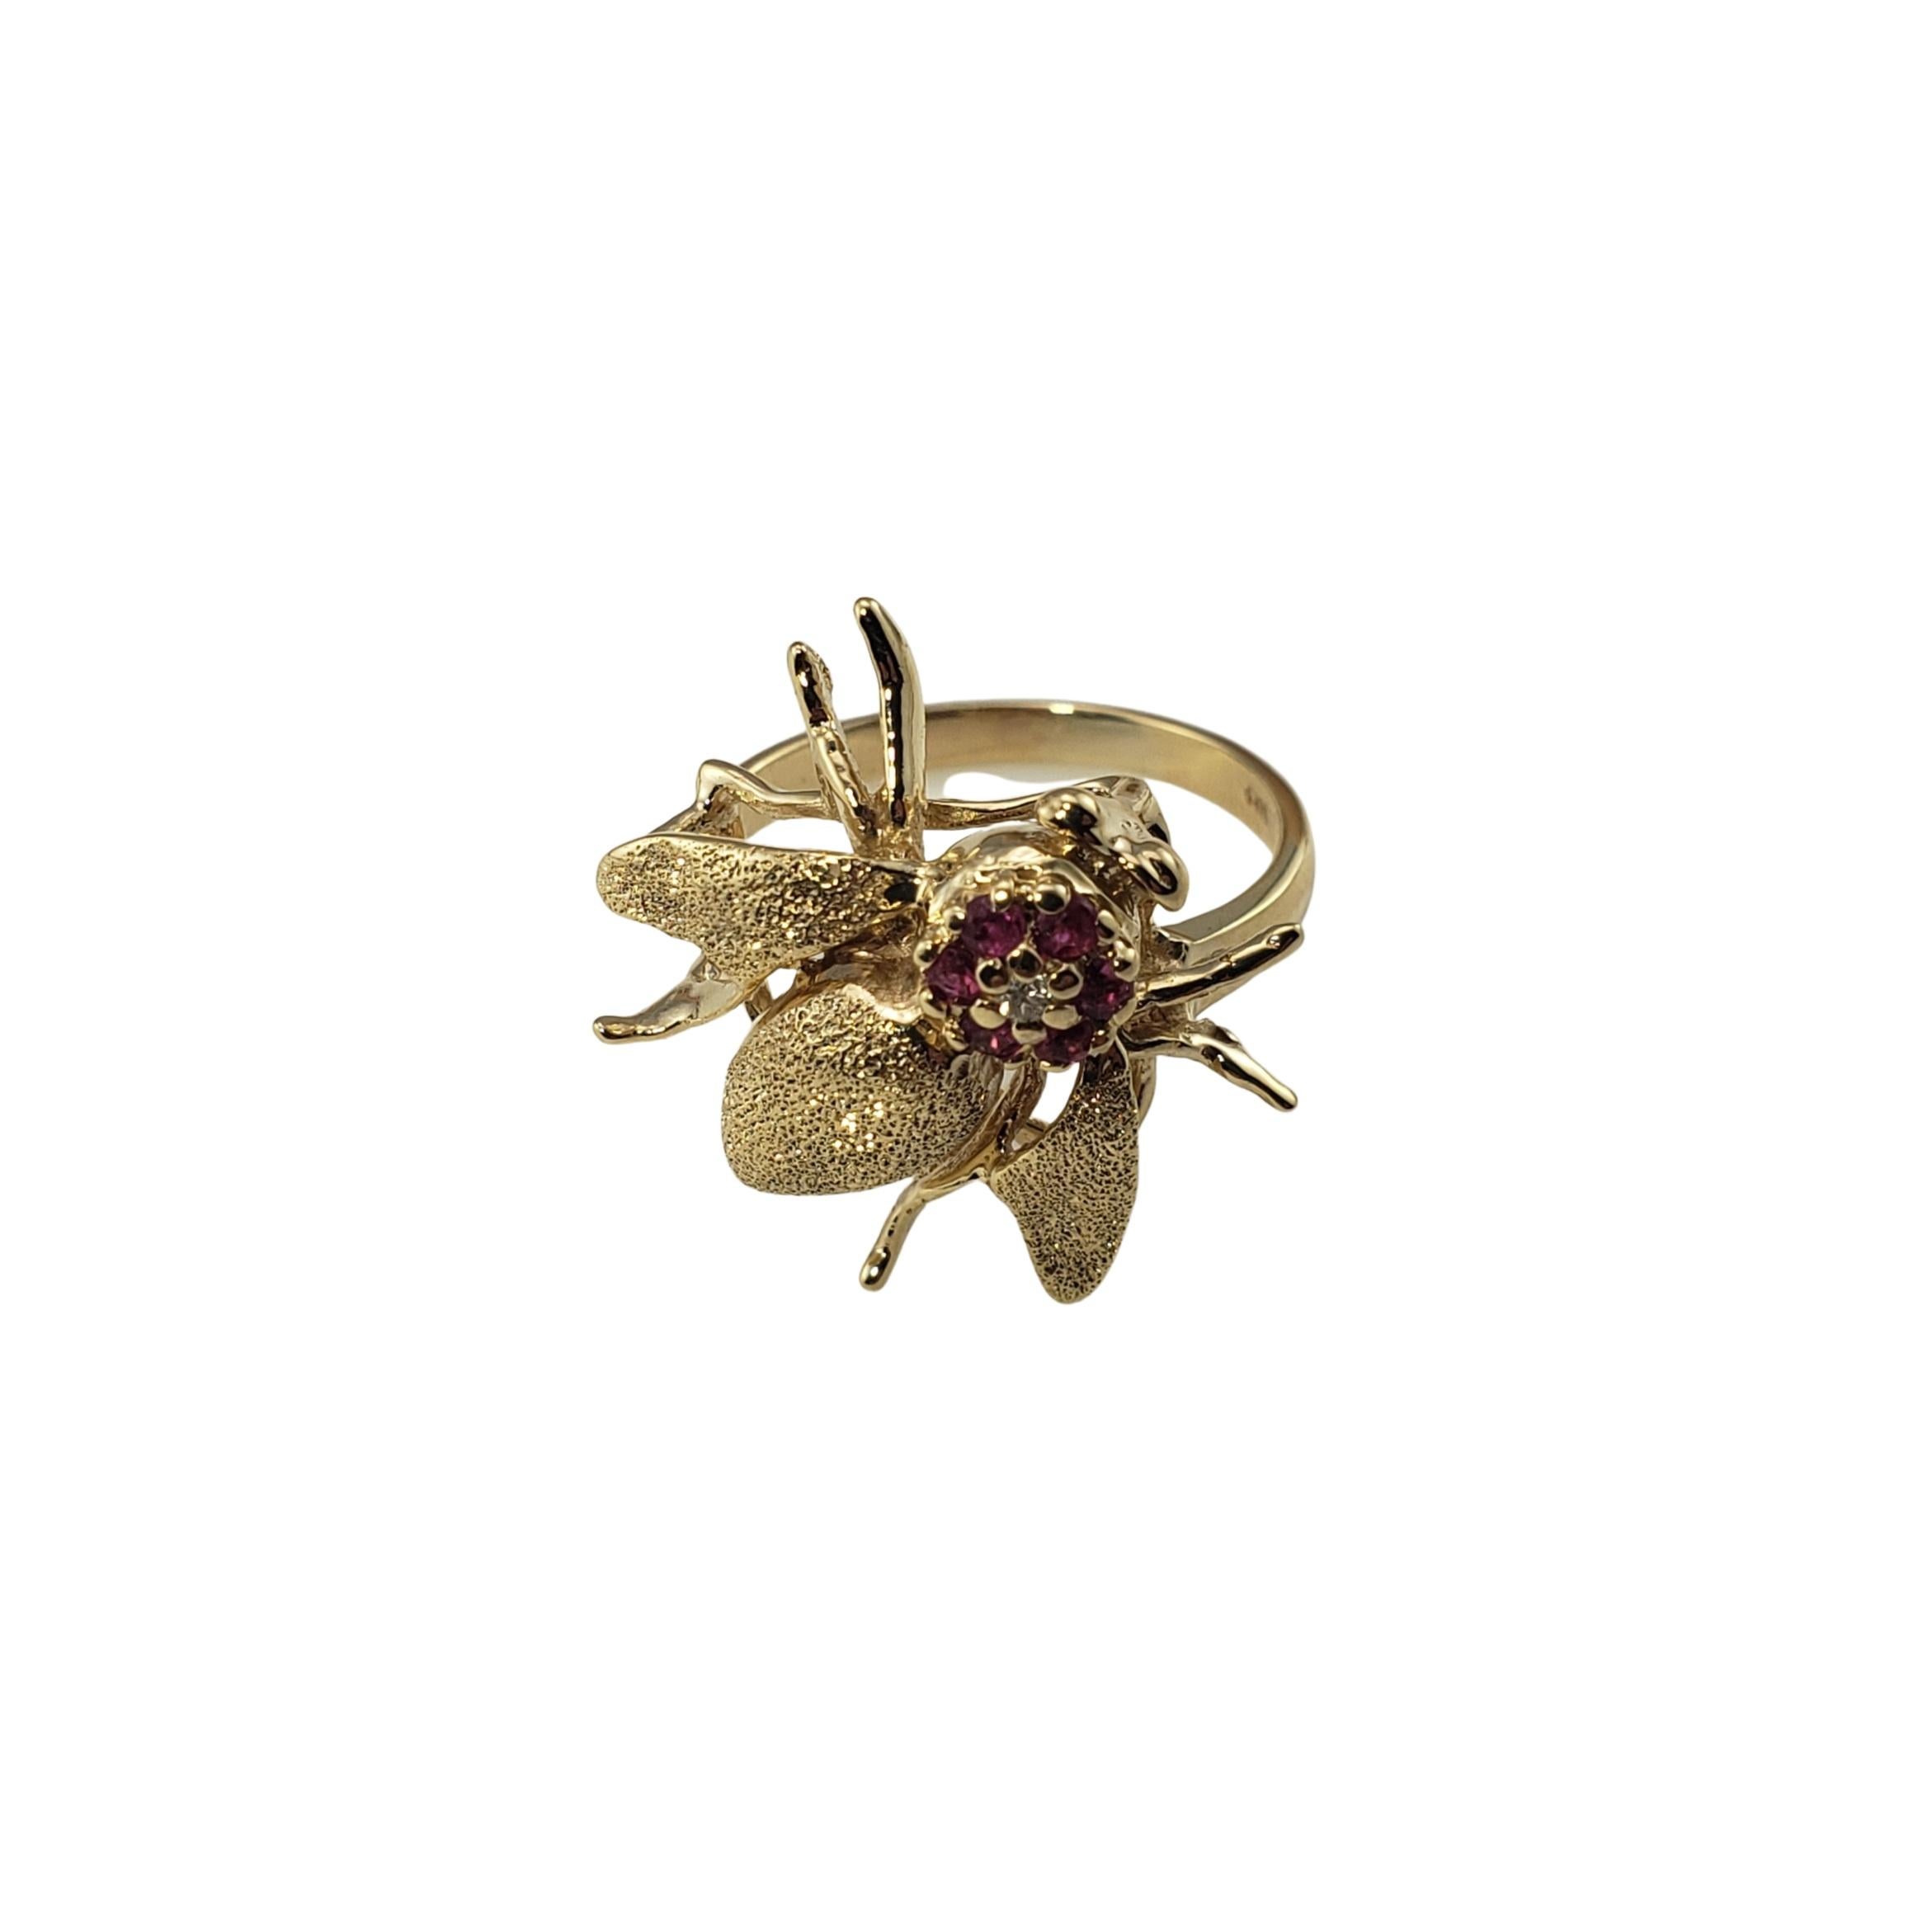 Vintage 14 Karat Yellow Gold Simulated Ruby and Diamond Bee Ring Size 7-

This lovely bee ring features one round brilliant cut diamond and six round simulated rubies set in beautifully detailed 14K yellow gold. Width: 20 mm. Shank: 2